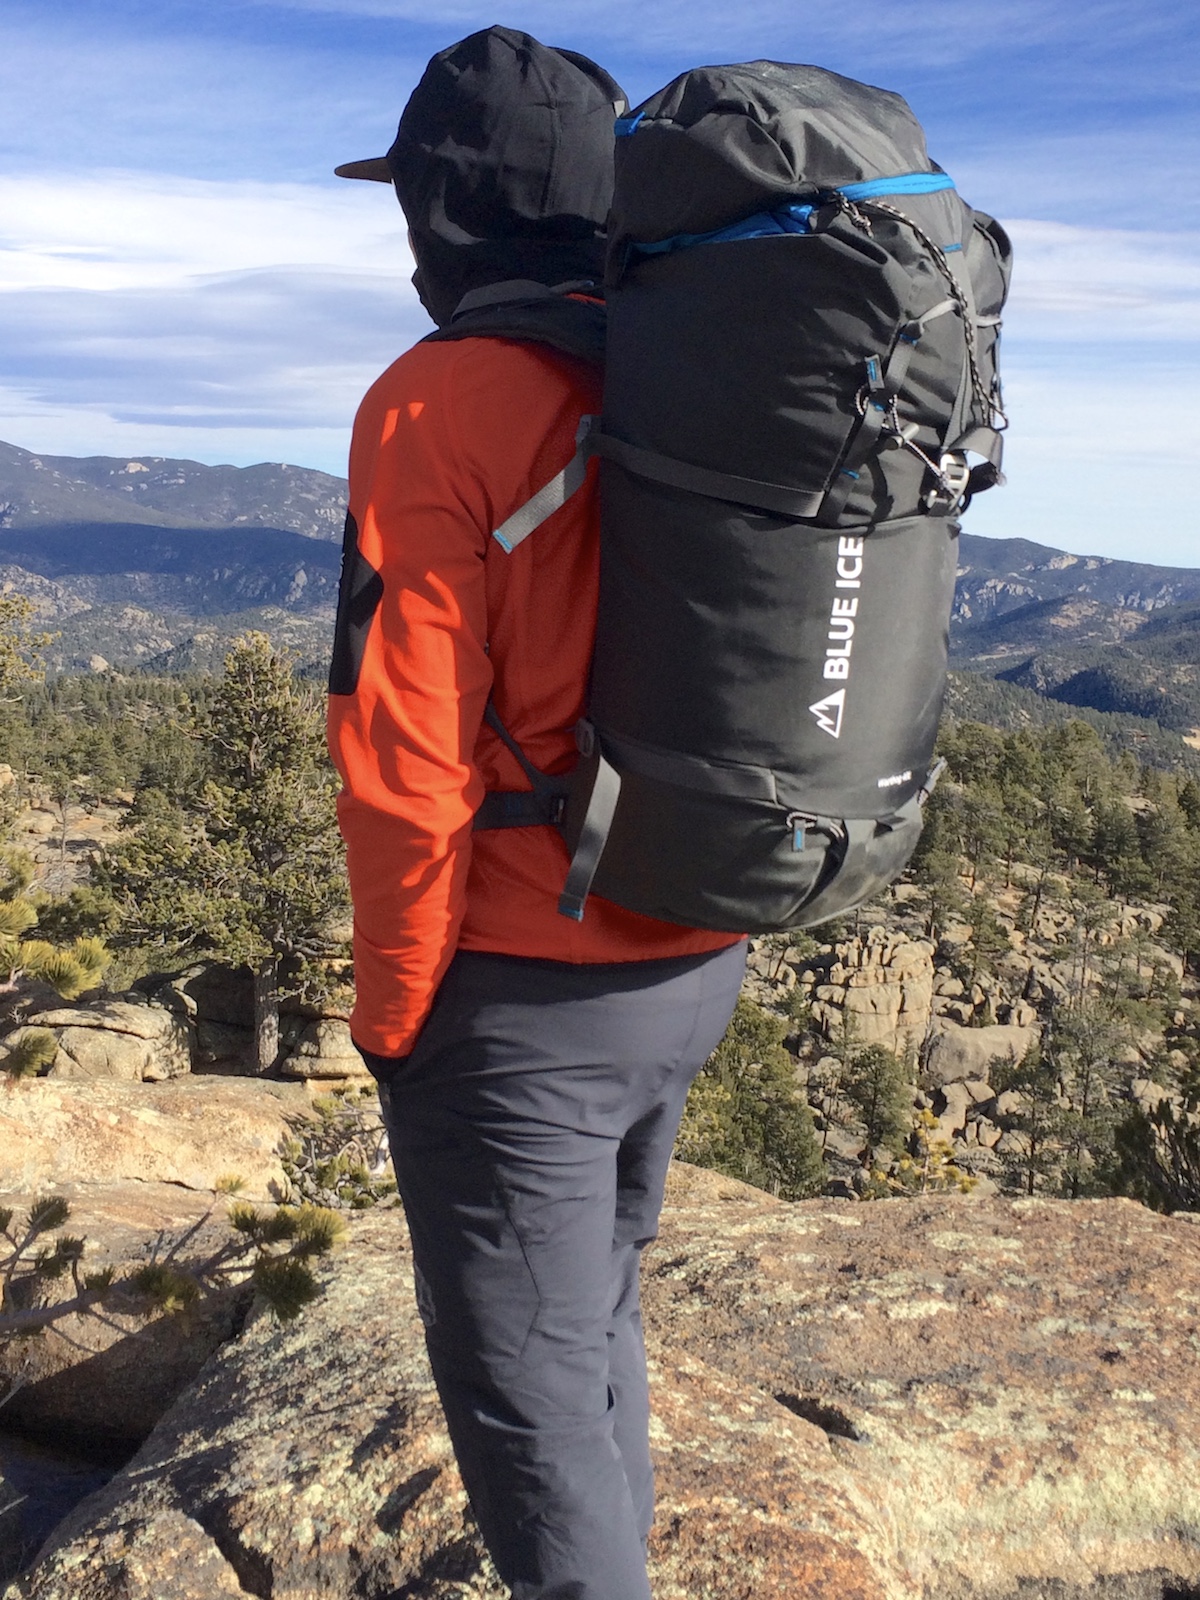 Mike Lewis carrying the Blue Ice Warthog 40L pack in Rocky Mountain National Park, Colorado. [Photo] Chris Wood